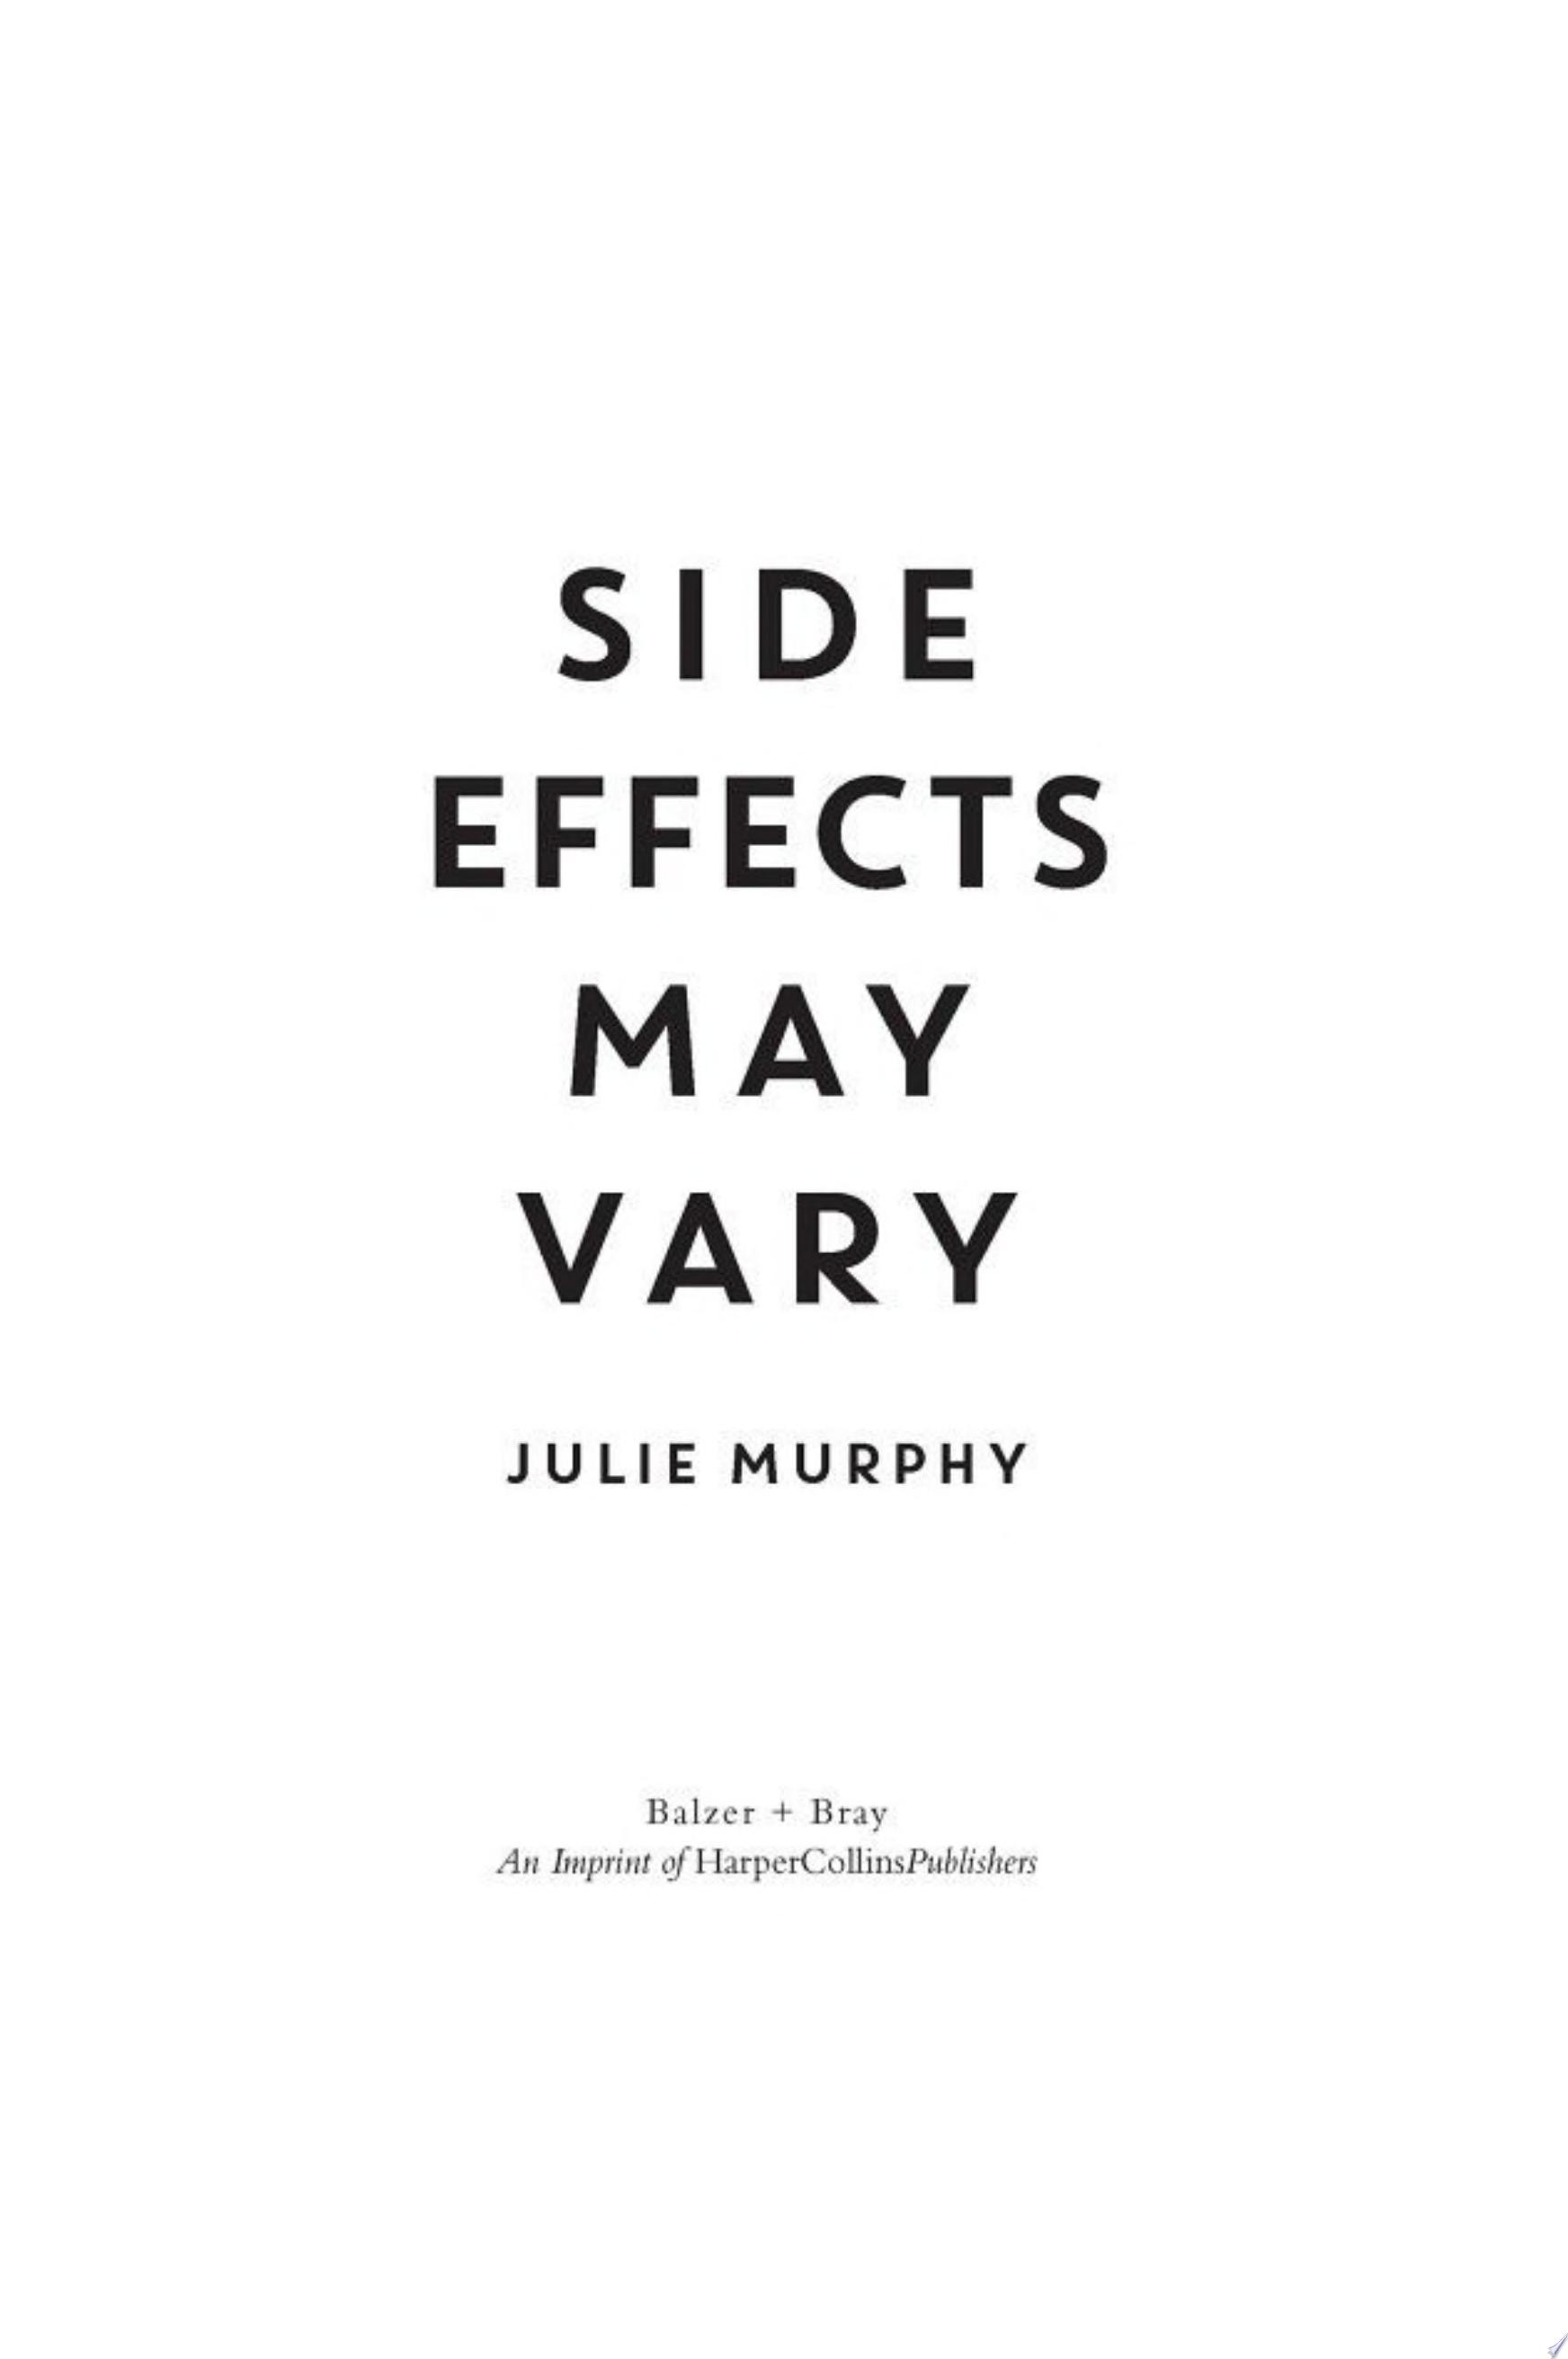 Image for "Side Effects May Vary"